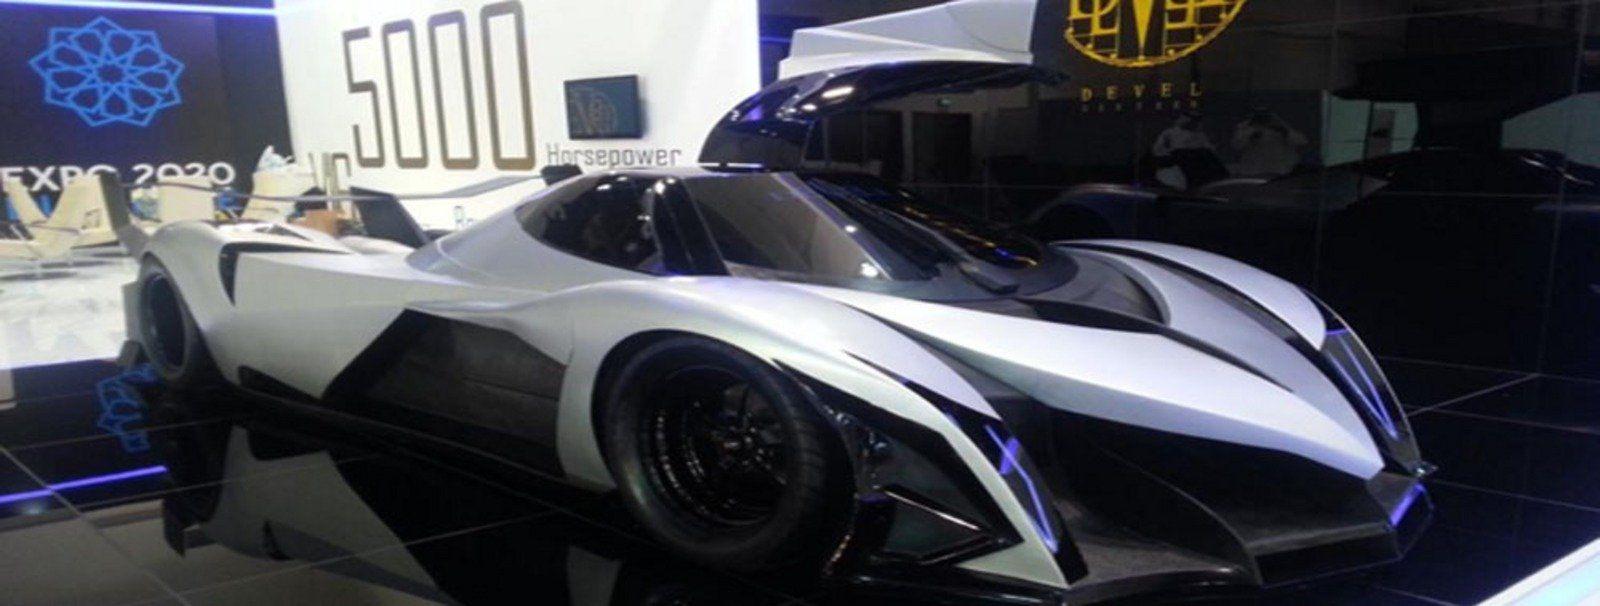 Devel Sixteen: Latest News, Reviews, Specifications, Prices, Photo And Videos